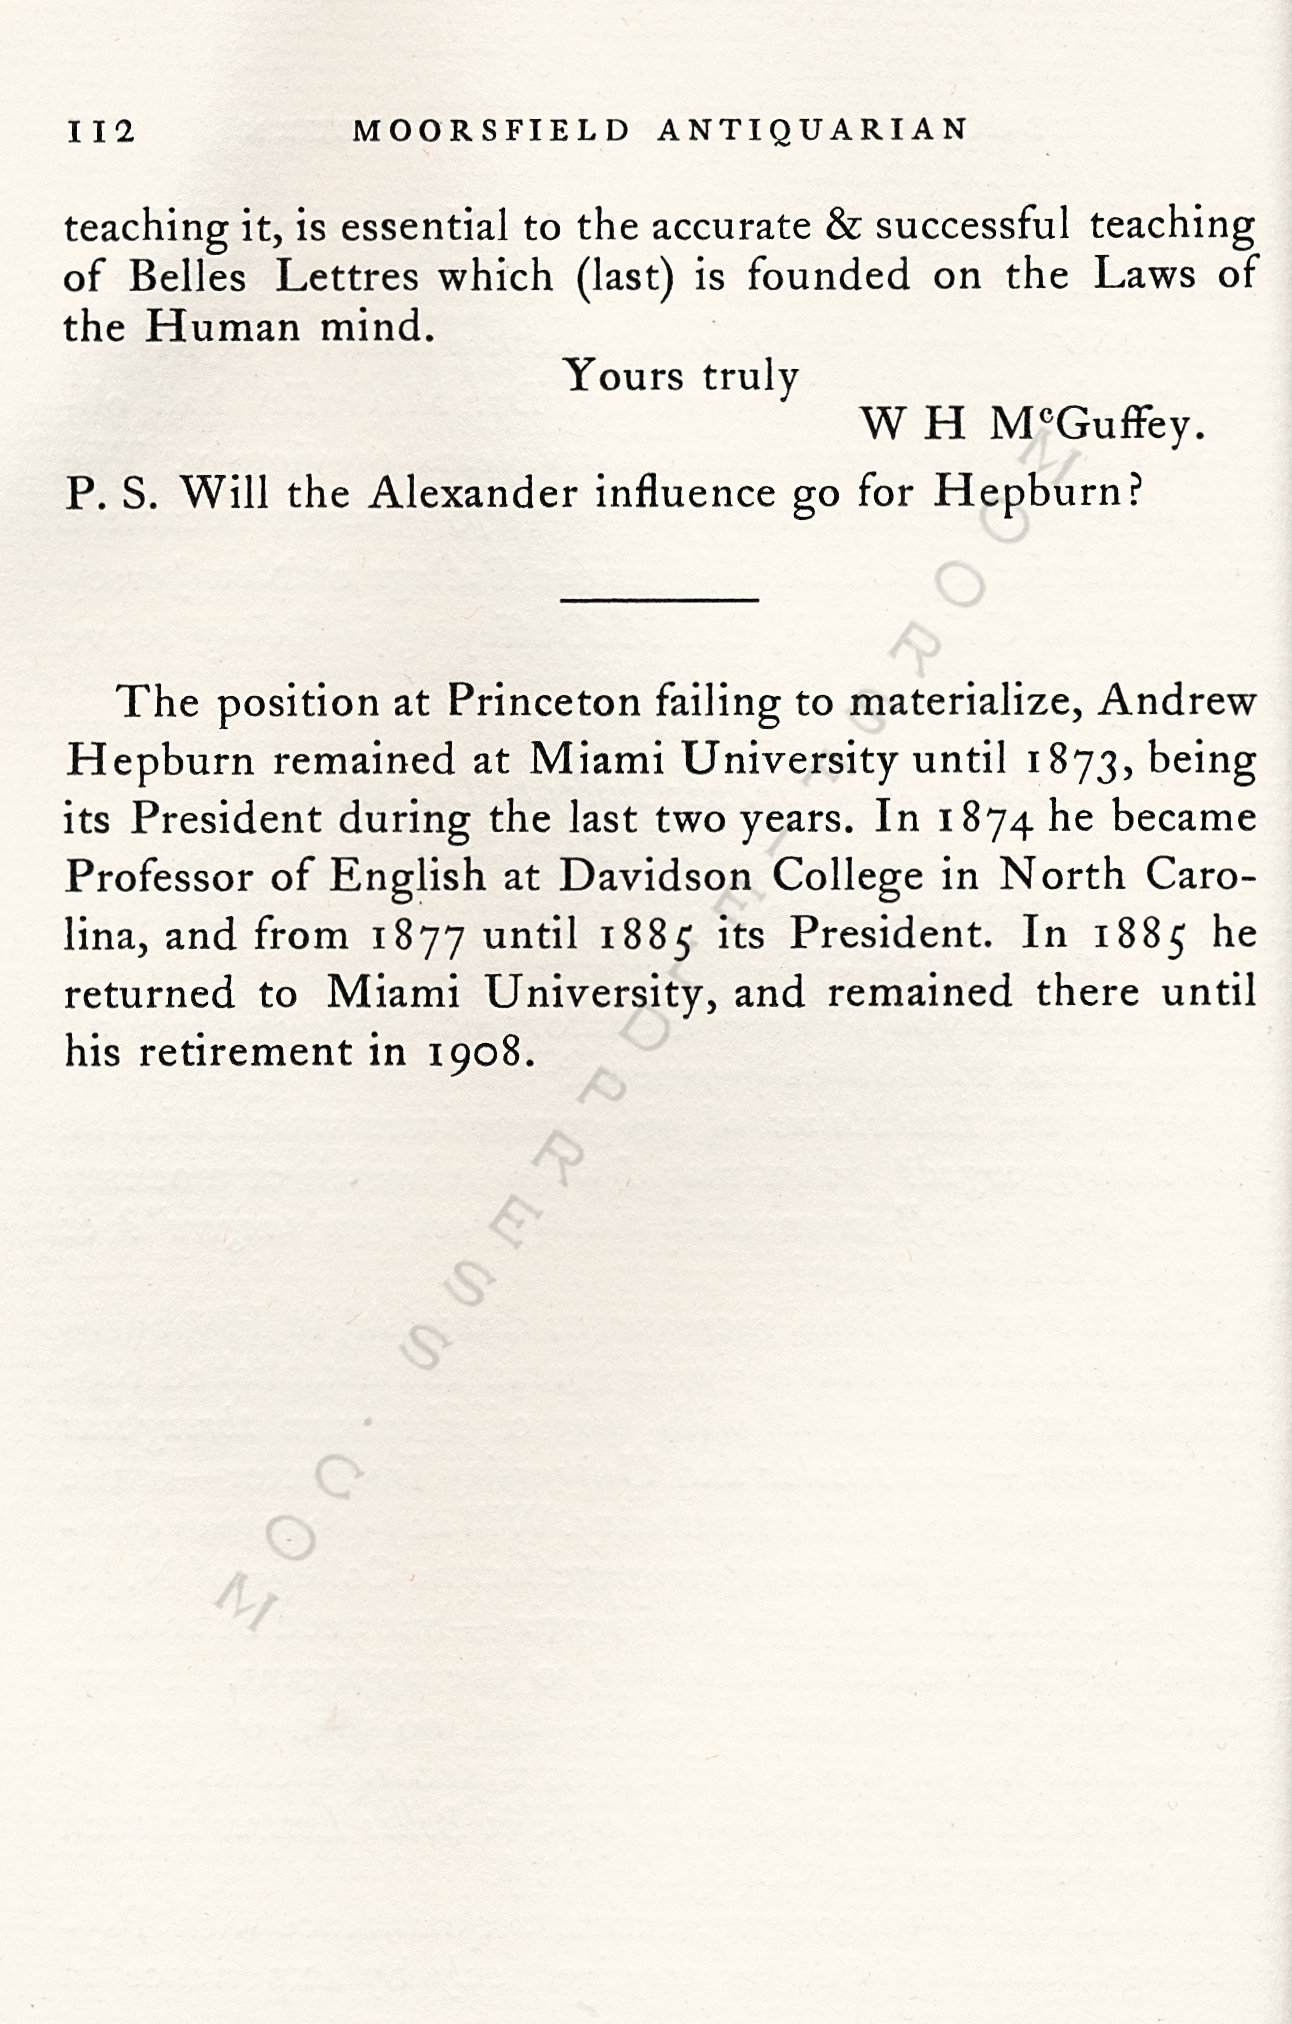 McGill
                      Papers-Education of Andrew D. Hepburn 1848
                      Son-in-law of William Holmes McGuffey 1848-1857